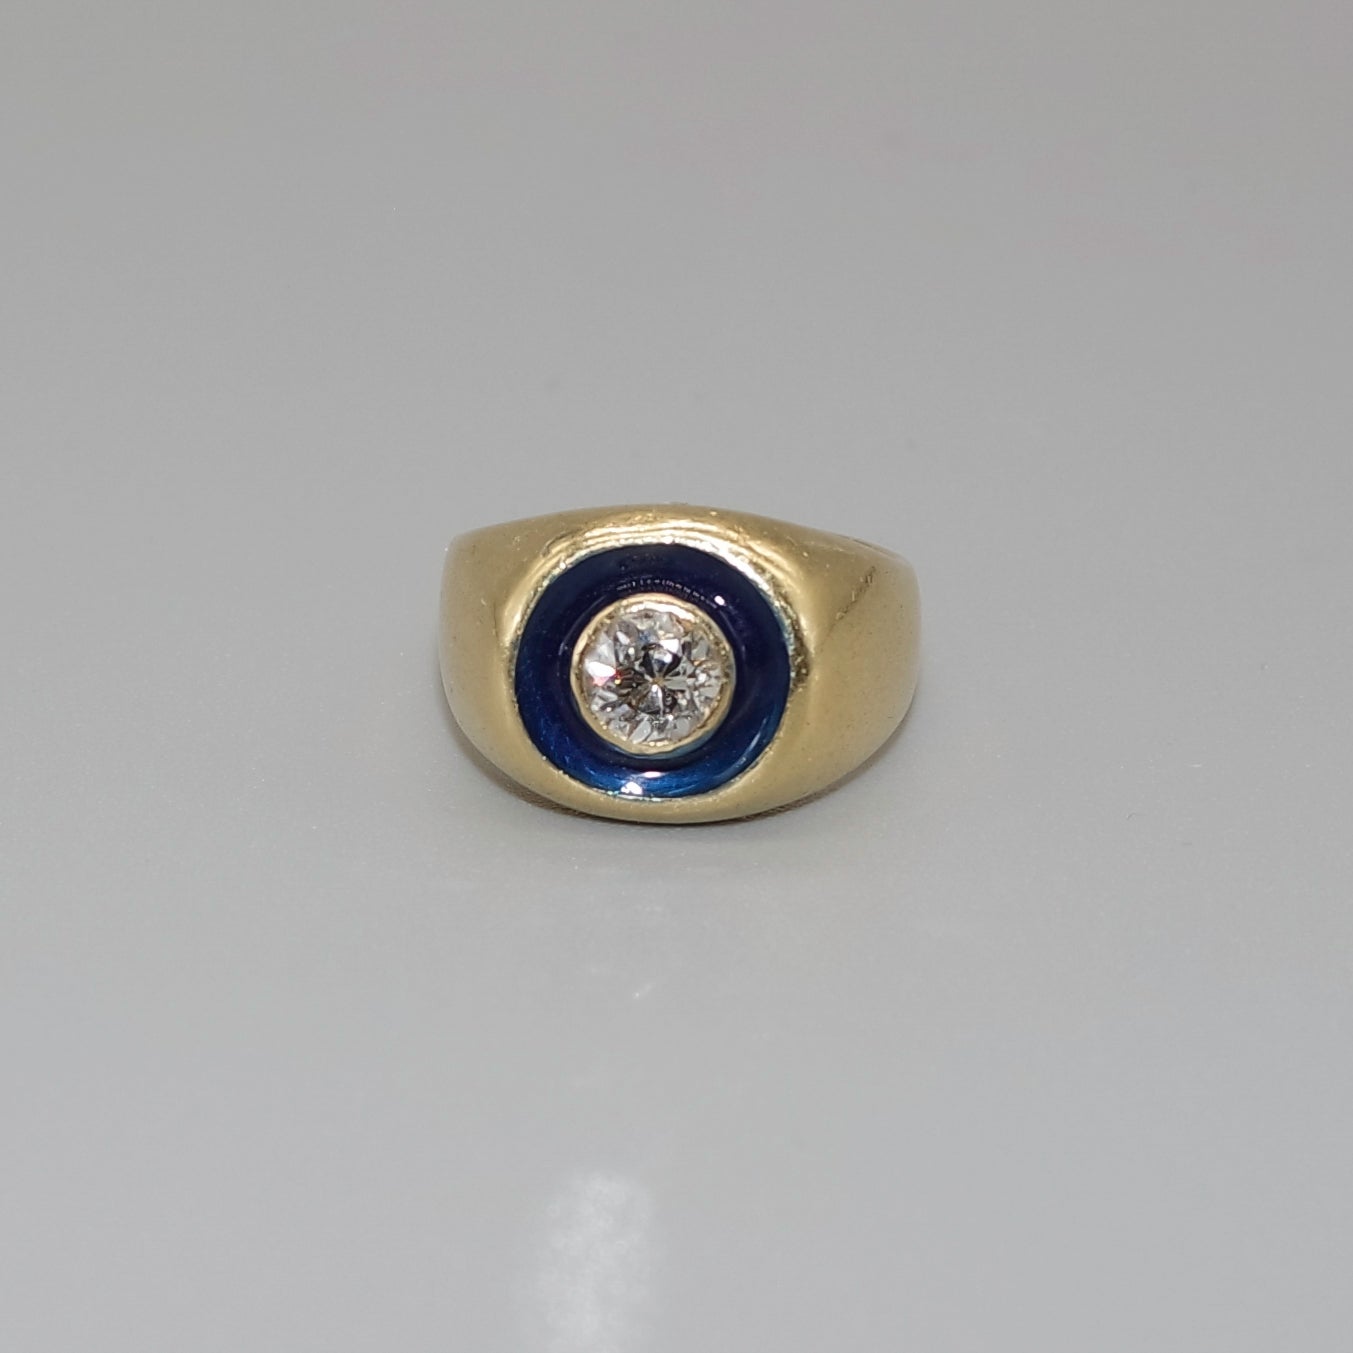 An elegant cluster ring , or chevalière, in 18 karat yellow gold, 1 central natural diamond and blue enamel. 
The creative is inspired by the art déco style, using the color contrast - dark blue enamel verse colorless diamond - as the main stylistic